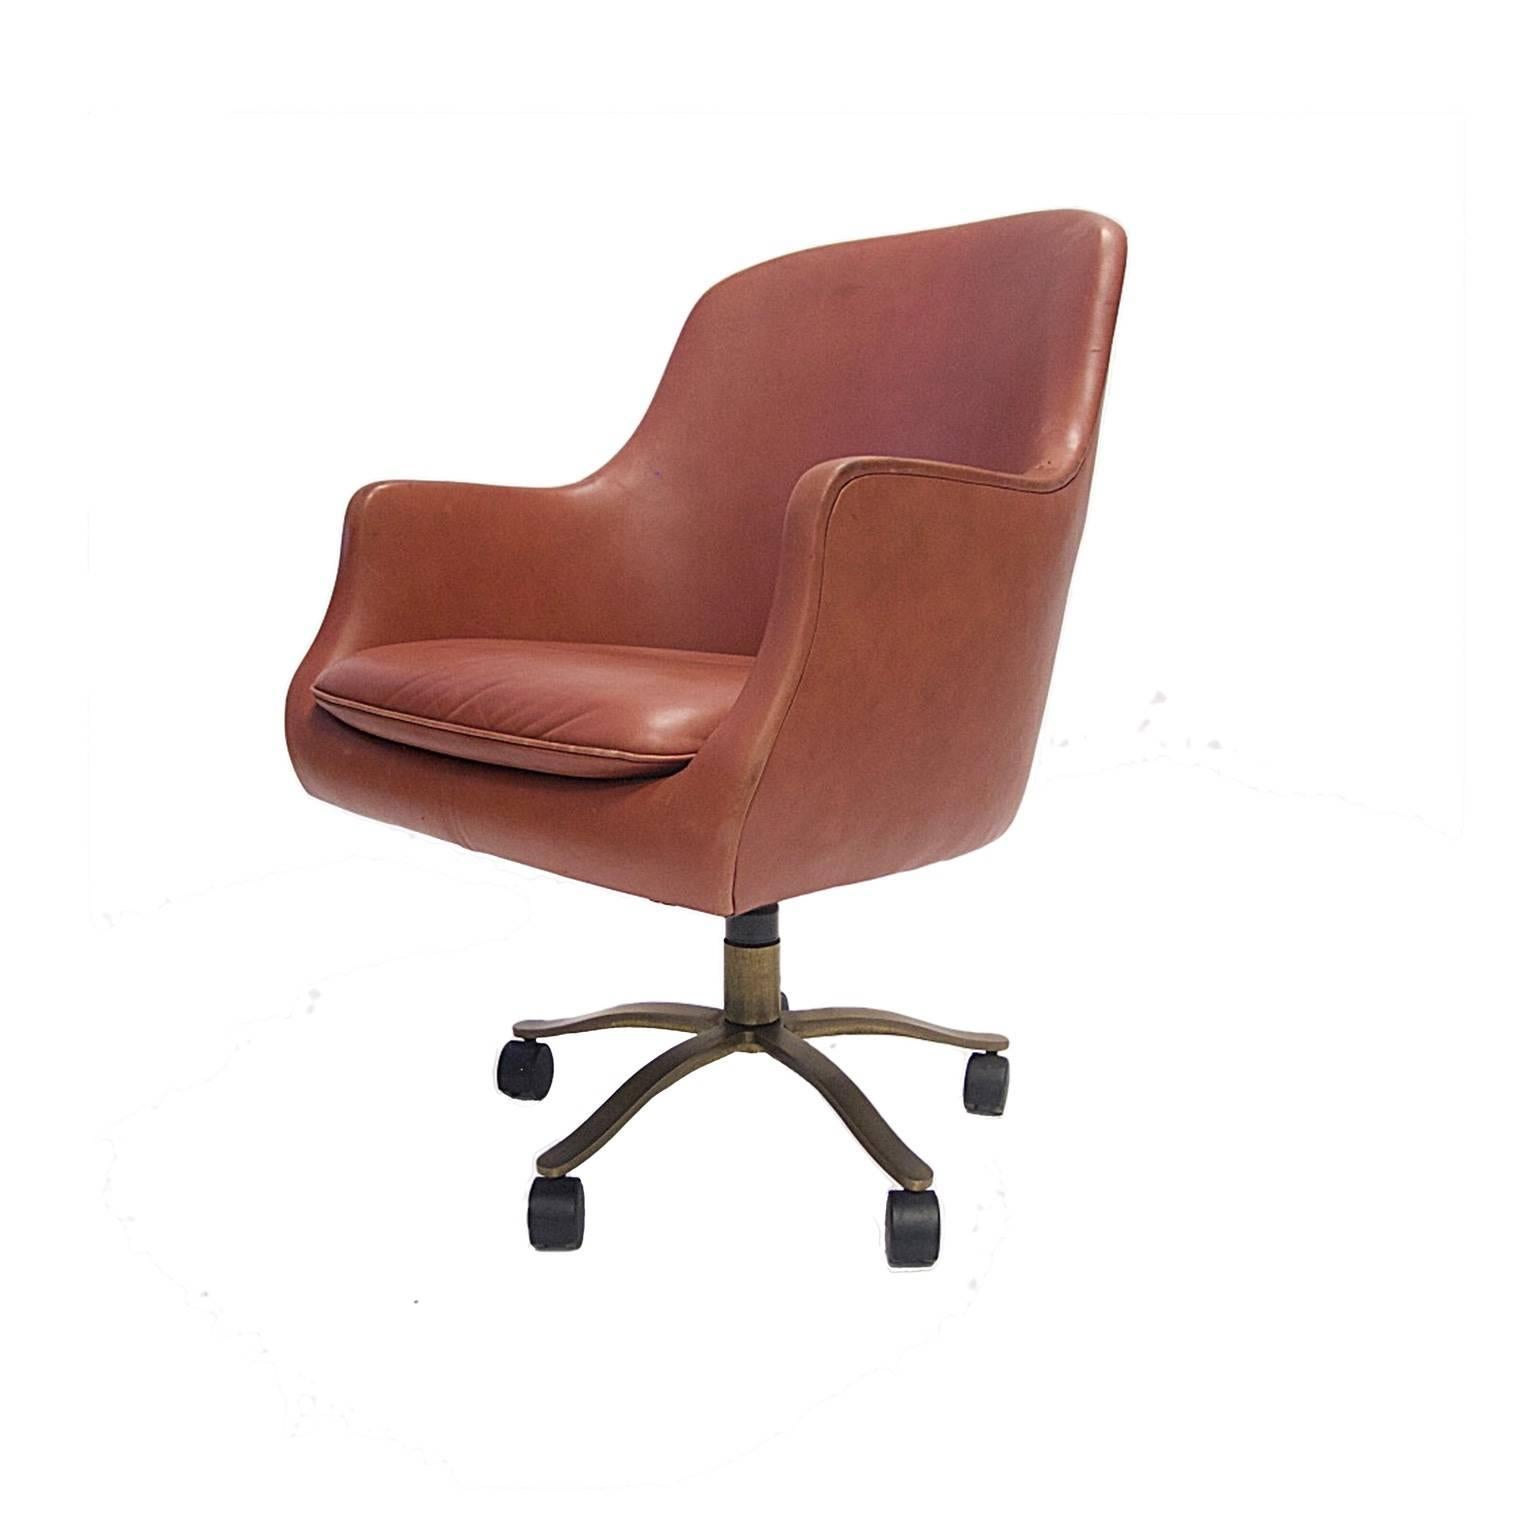 Nicos Zographos English bucket chair with natural dyed leather. Bronze five star base with casters.